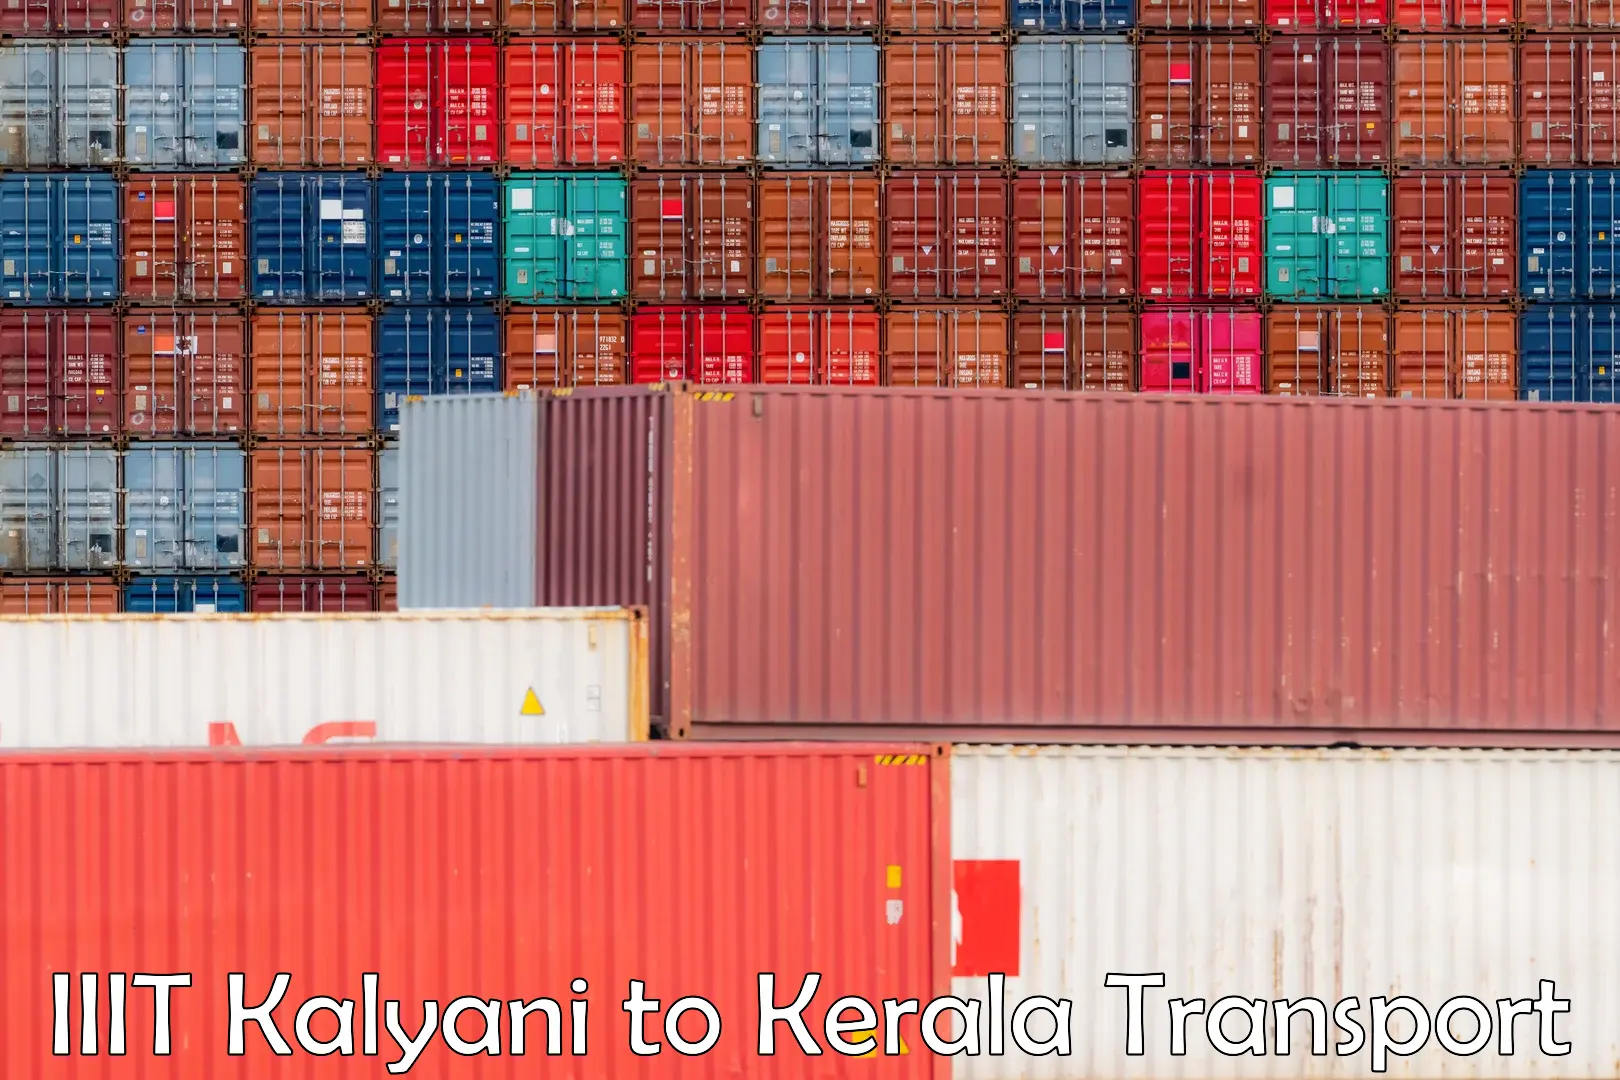 Transport in sharing IIIT Kalyani to Cochin University of Science and Technology